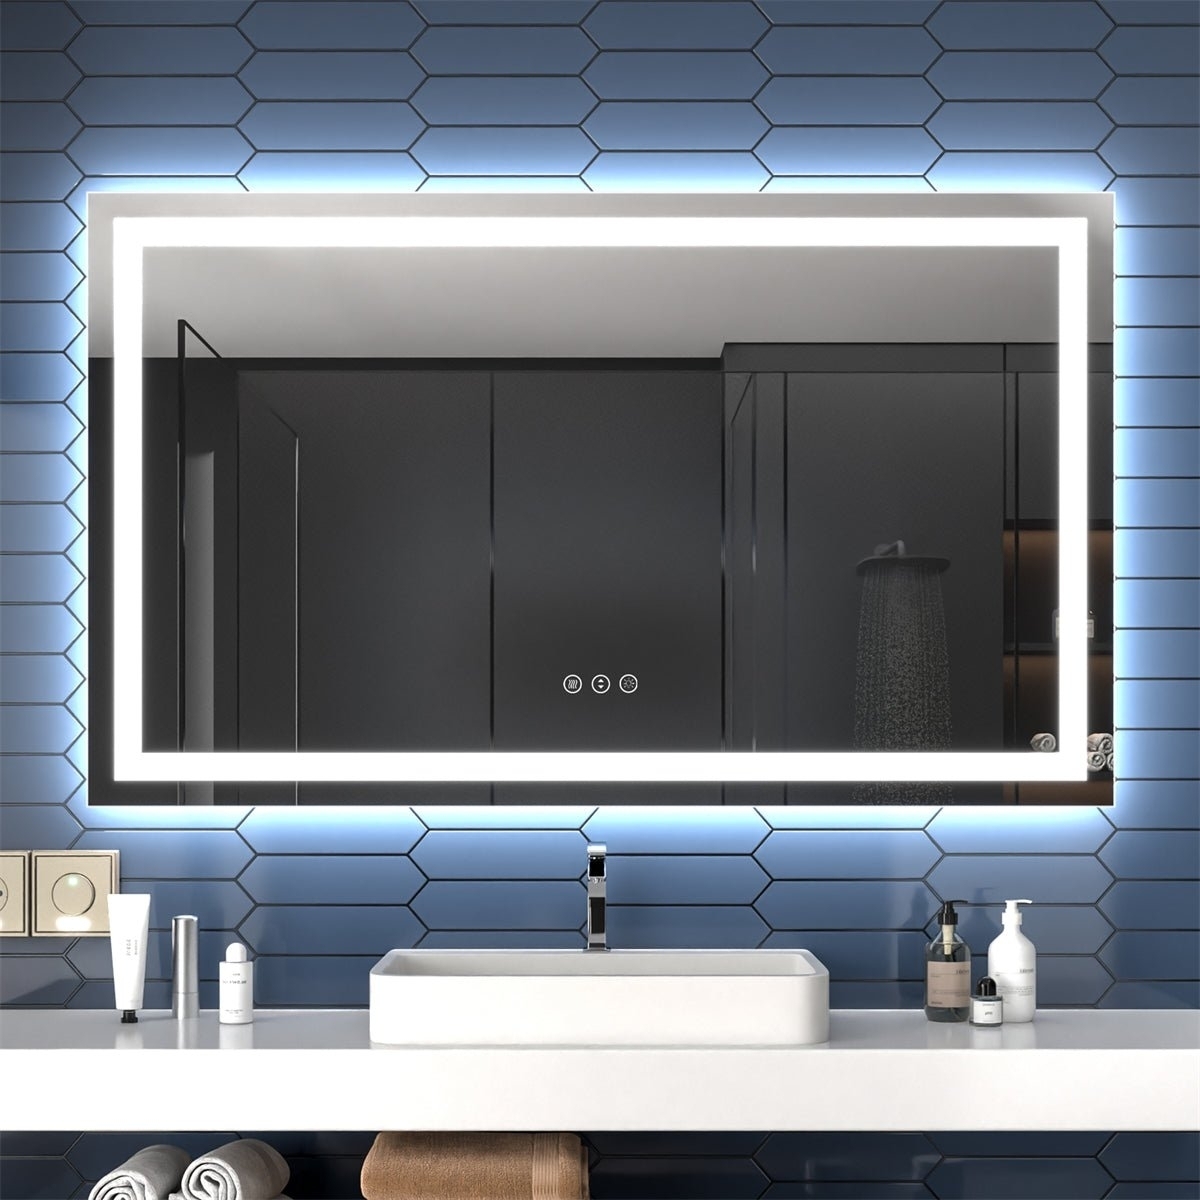 Apex 60 W X 36 H LED Heated Bathroom Mirror,Anti Fog,Dimmable,Dual Lighting Mode,Tempered Glass